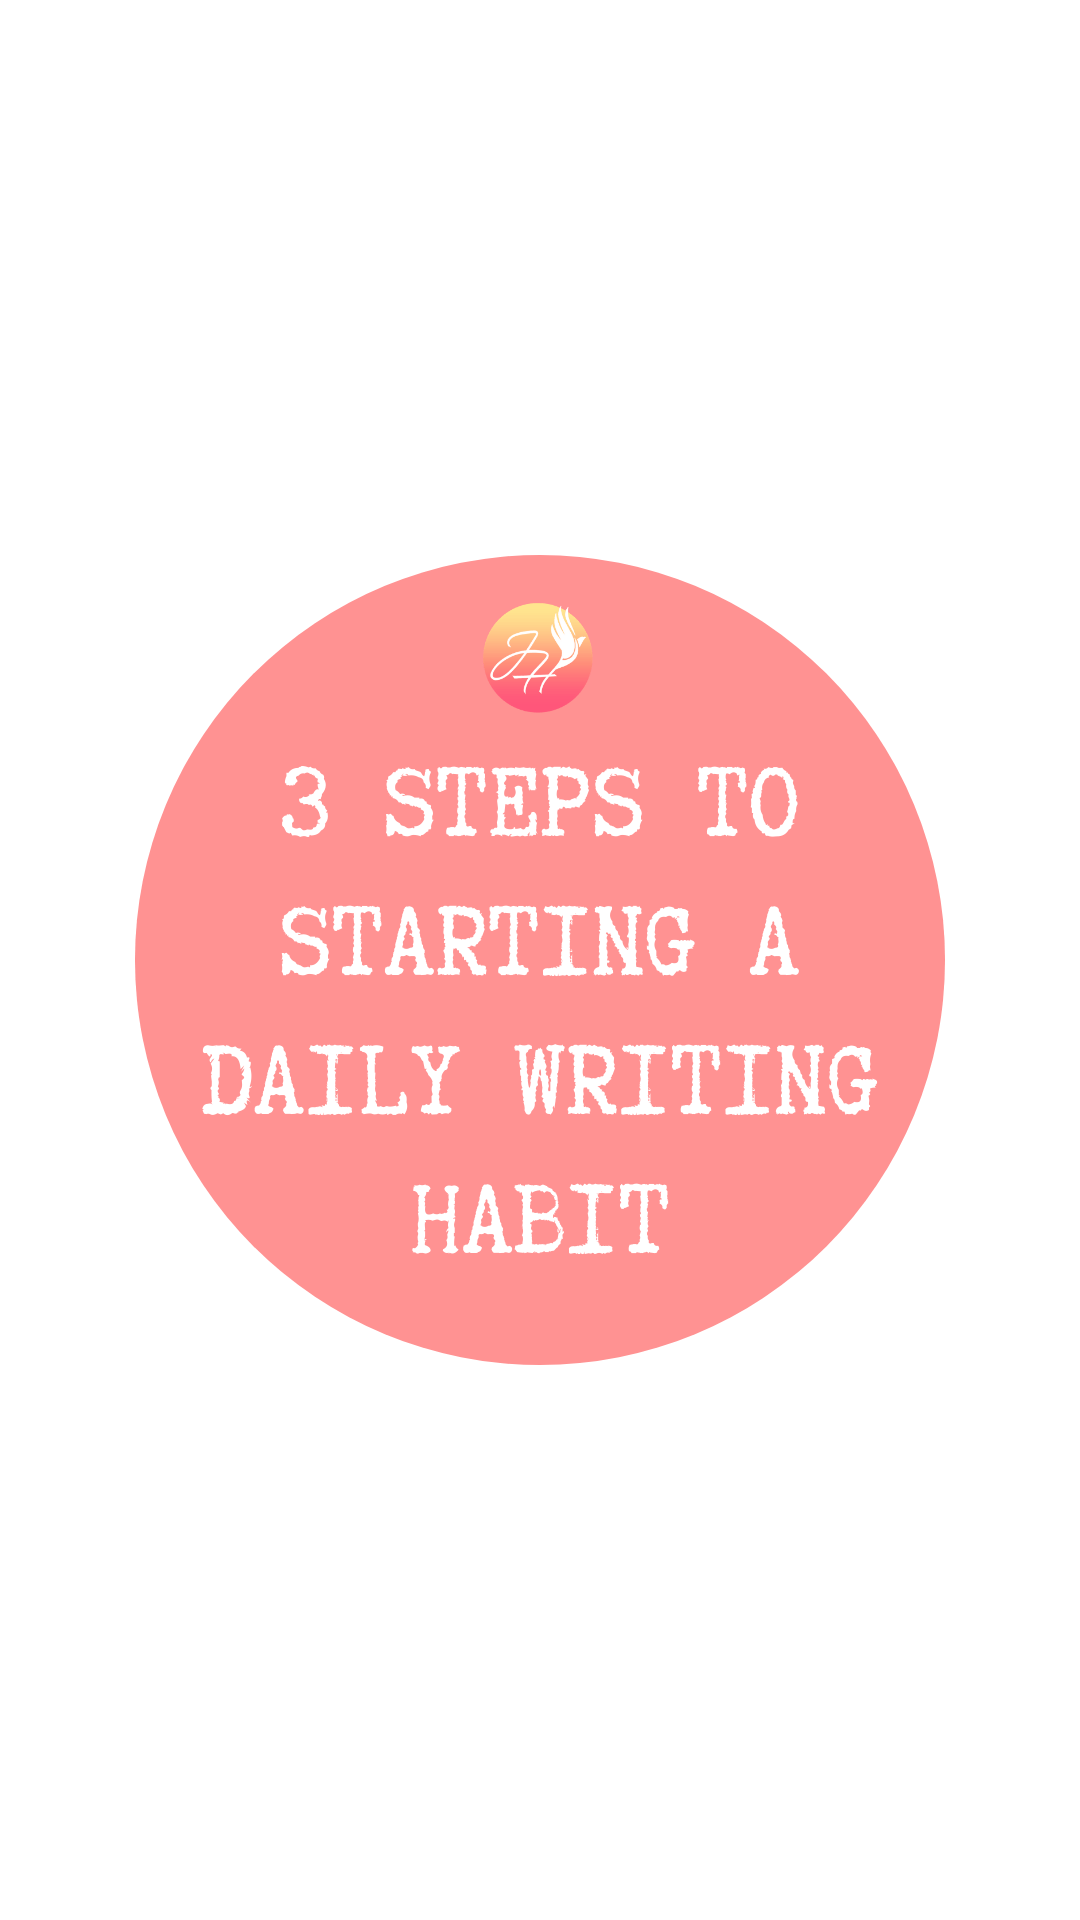 3 STEPS TO STARTING A DAILY WRITING HABIT